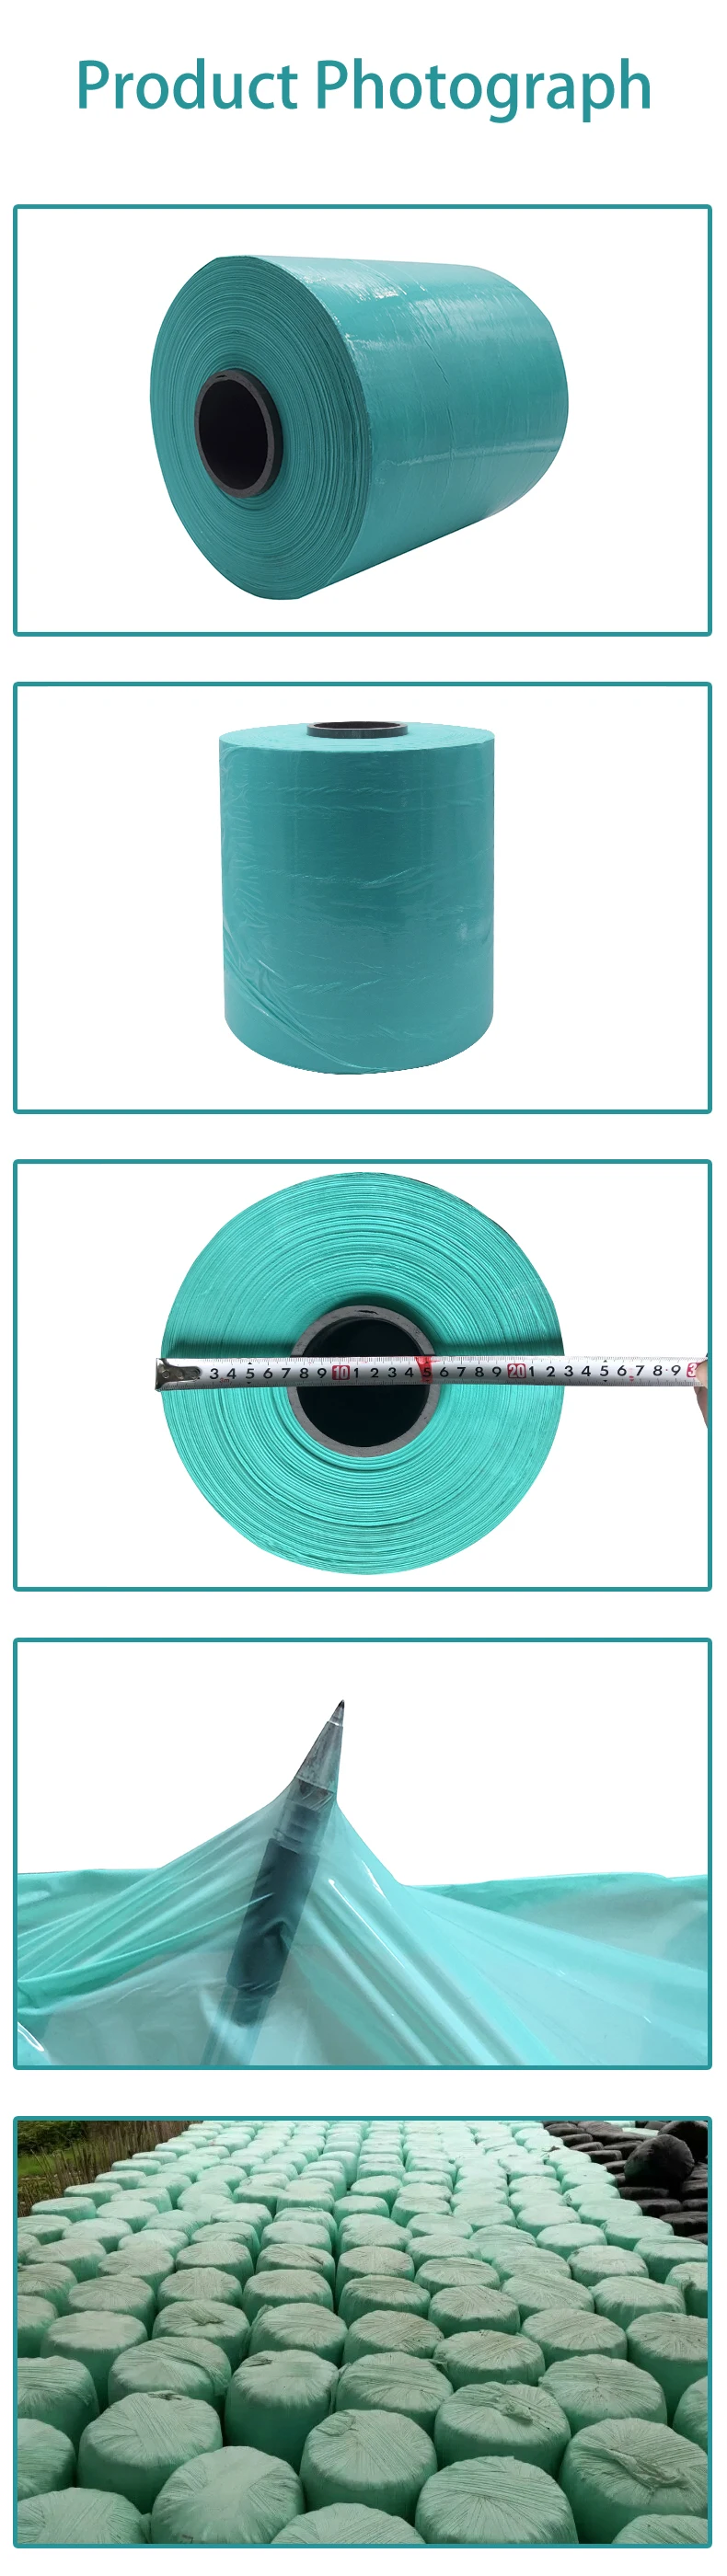 Plastic Wrapping Green Wrap Hay Bale Silage Film